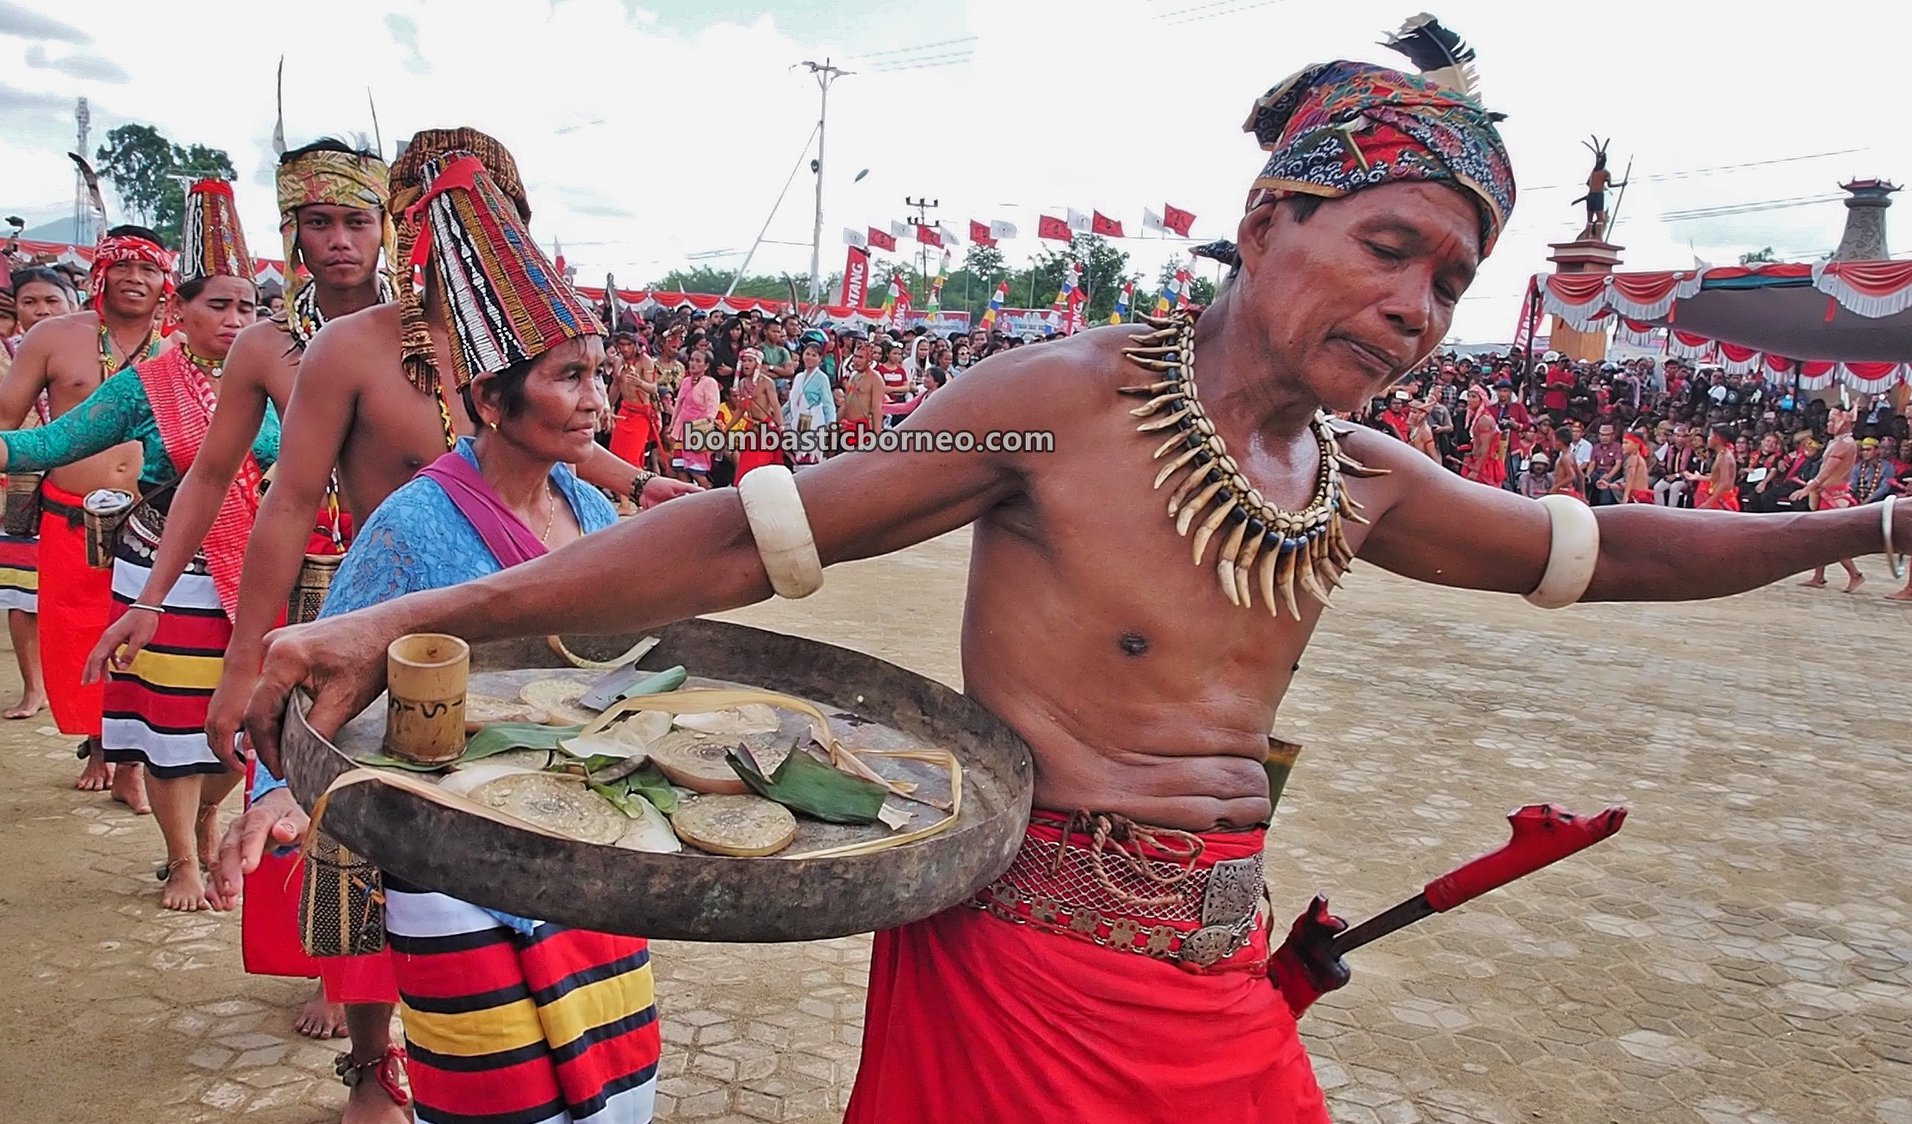 authentic, indigenous, culture, ethnic, event, Indonesia, West Kalimantan, Ramin Bantang, backpackers, Obyek wisata, Tourism, Trans Borneo, 婆罗洲原住民部落, 印尼西加里曼丹, 孟加映达雅文化,